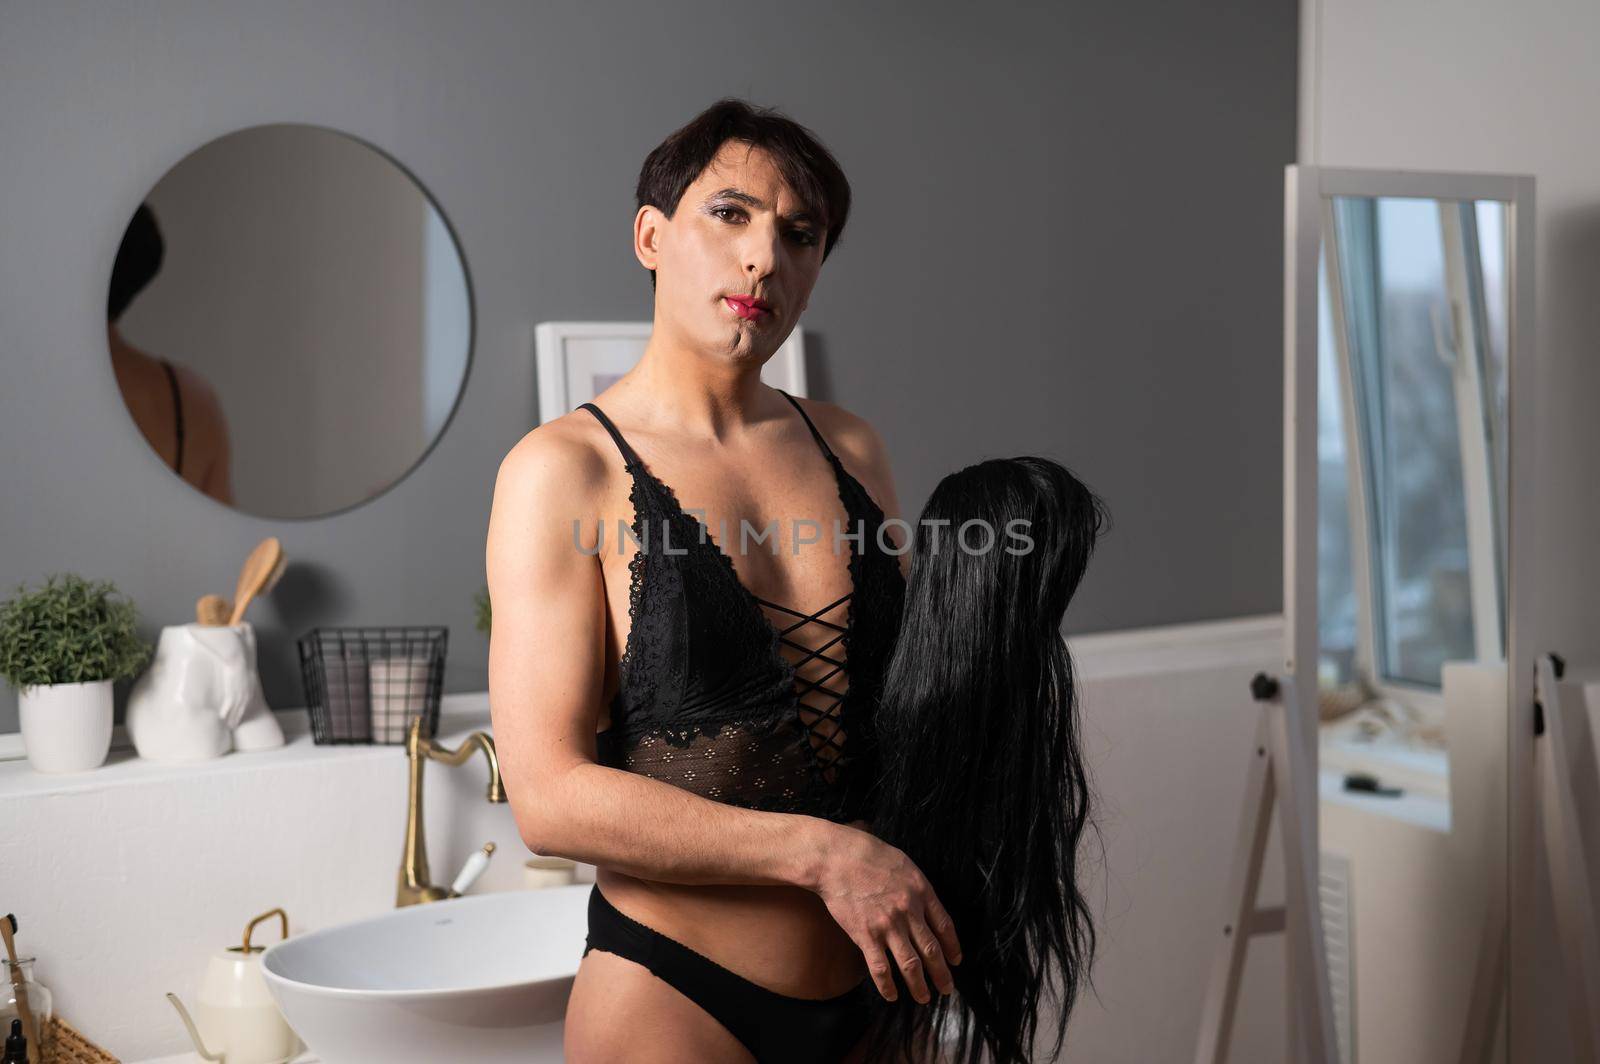 Homosexual preening in front of the mirror. A transgender man combing a wig